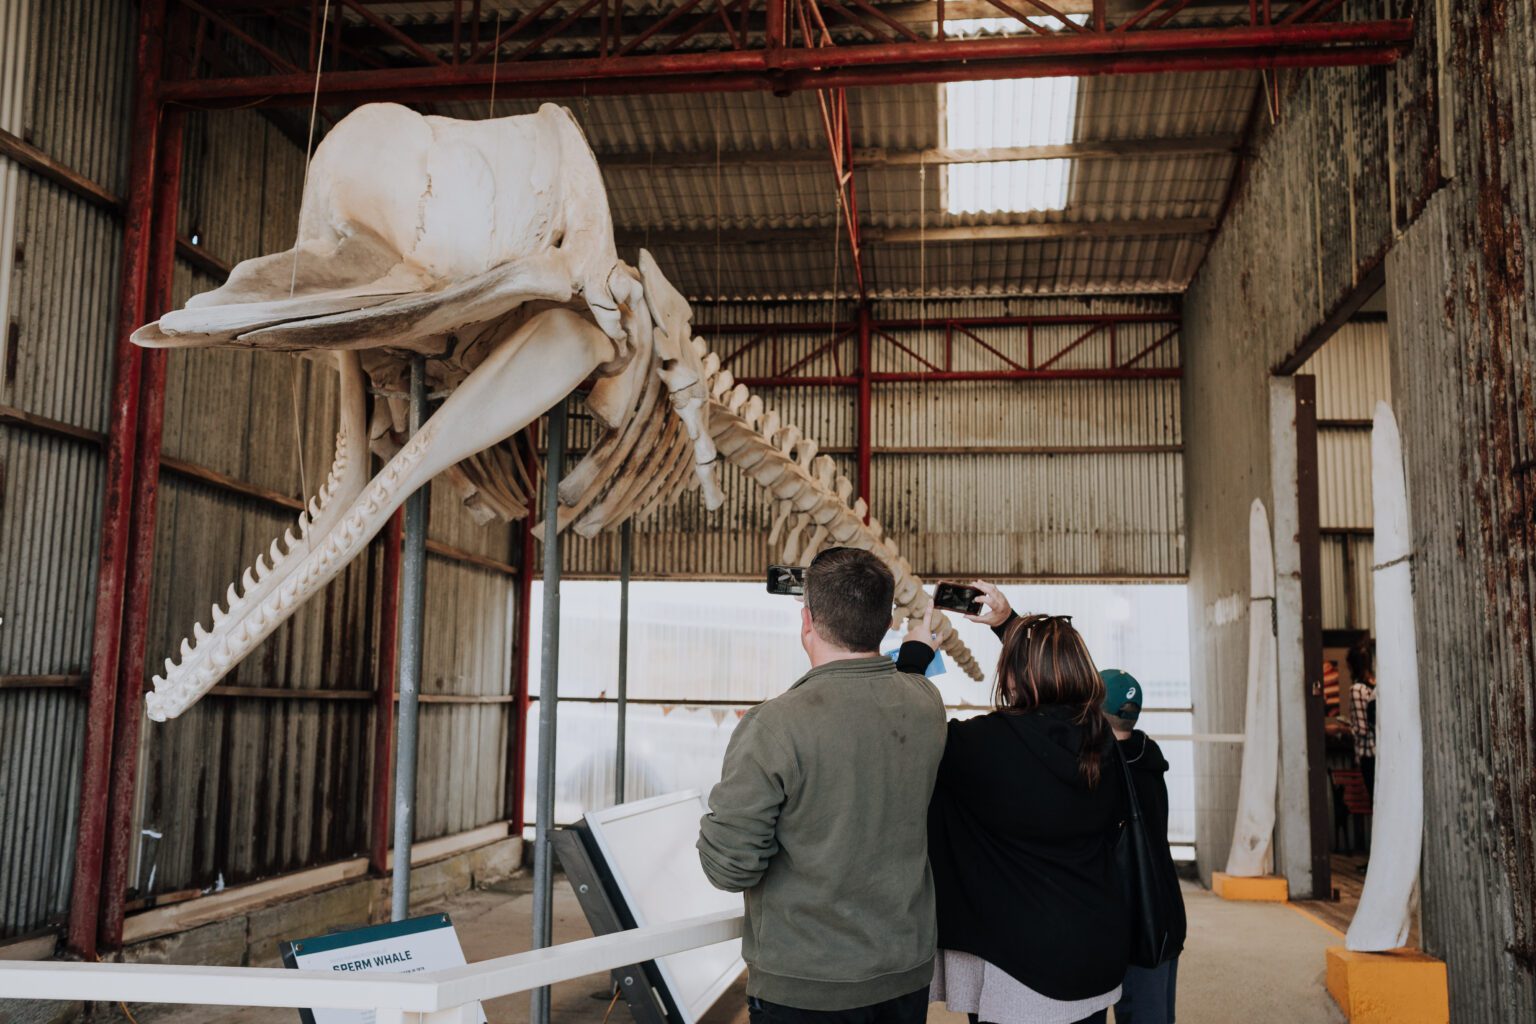 Family of three with back to camera, taking photos of Sperm whale skeleton